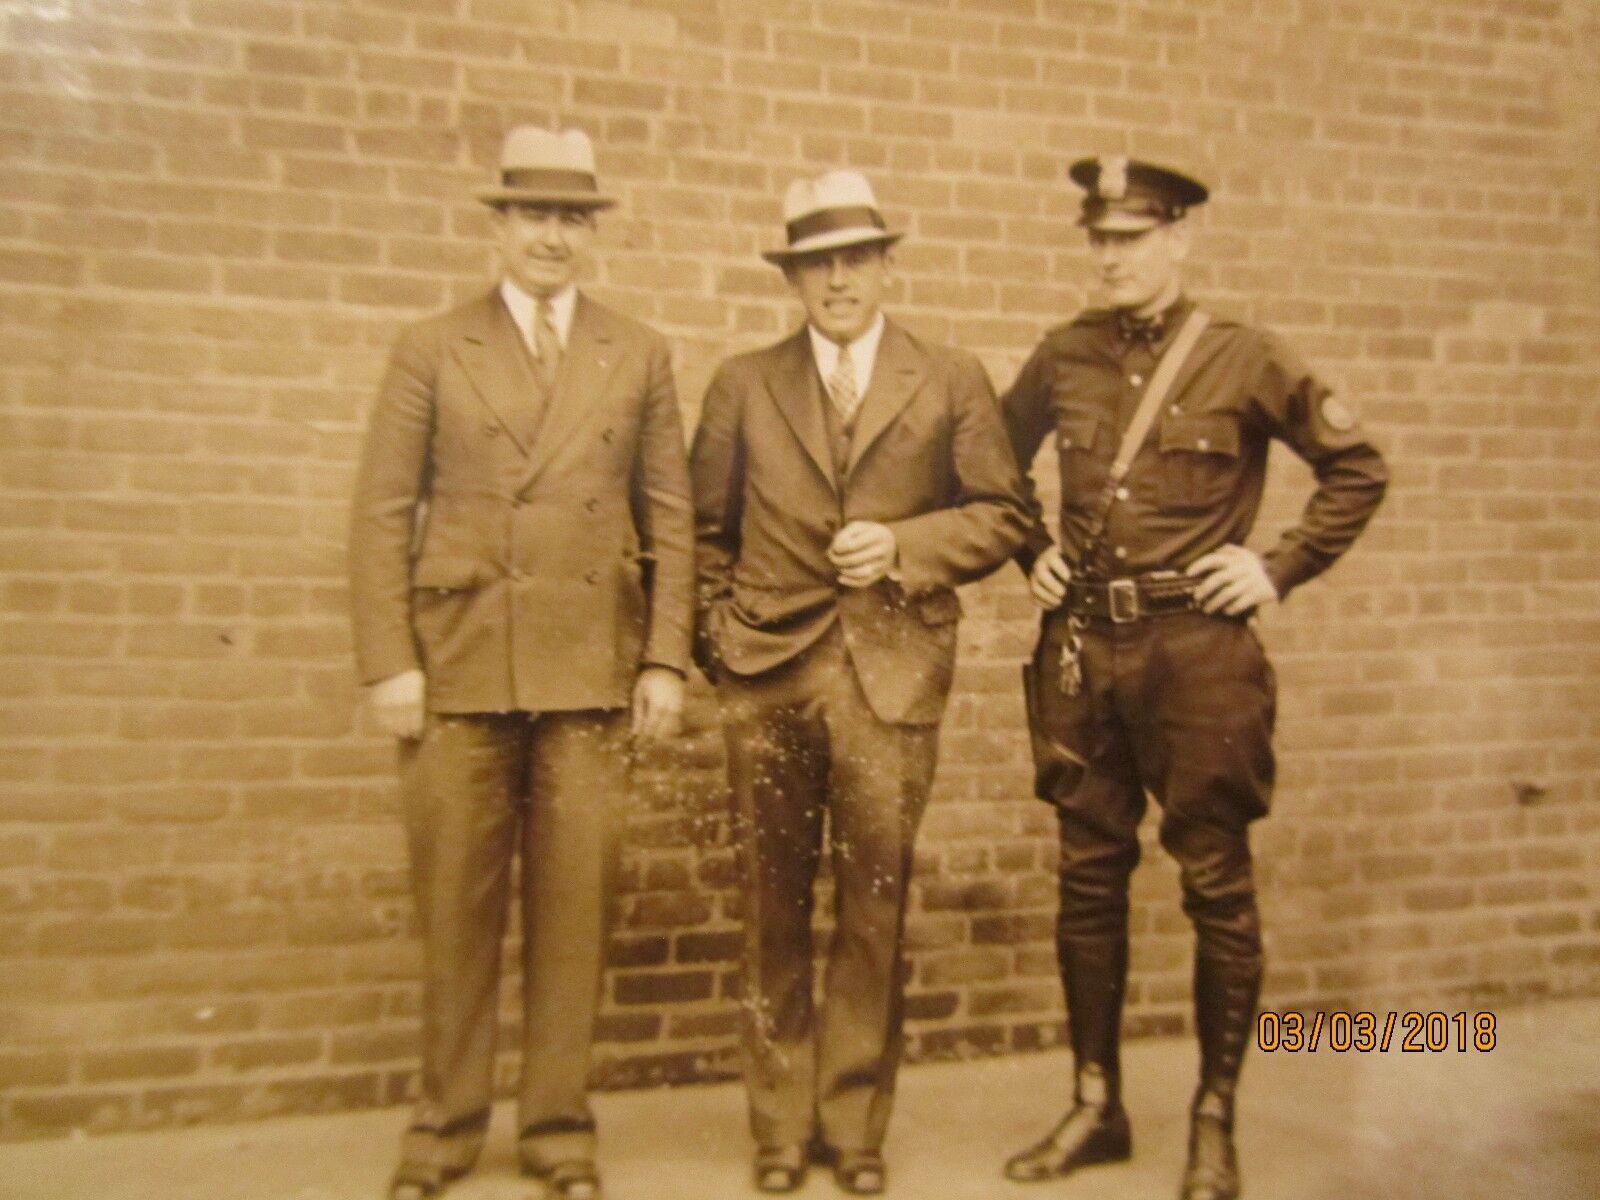 Real Photo of Motorcycle Patrolman with Two Men in Suits